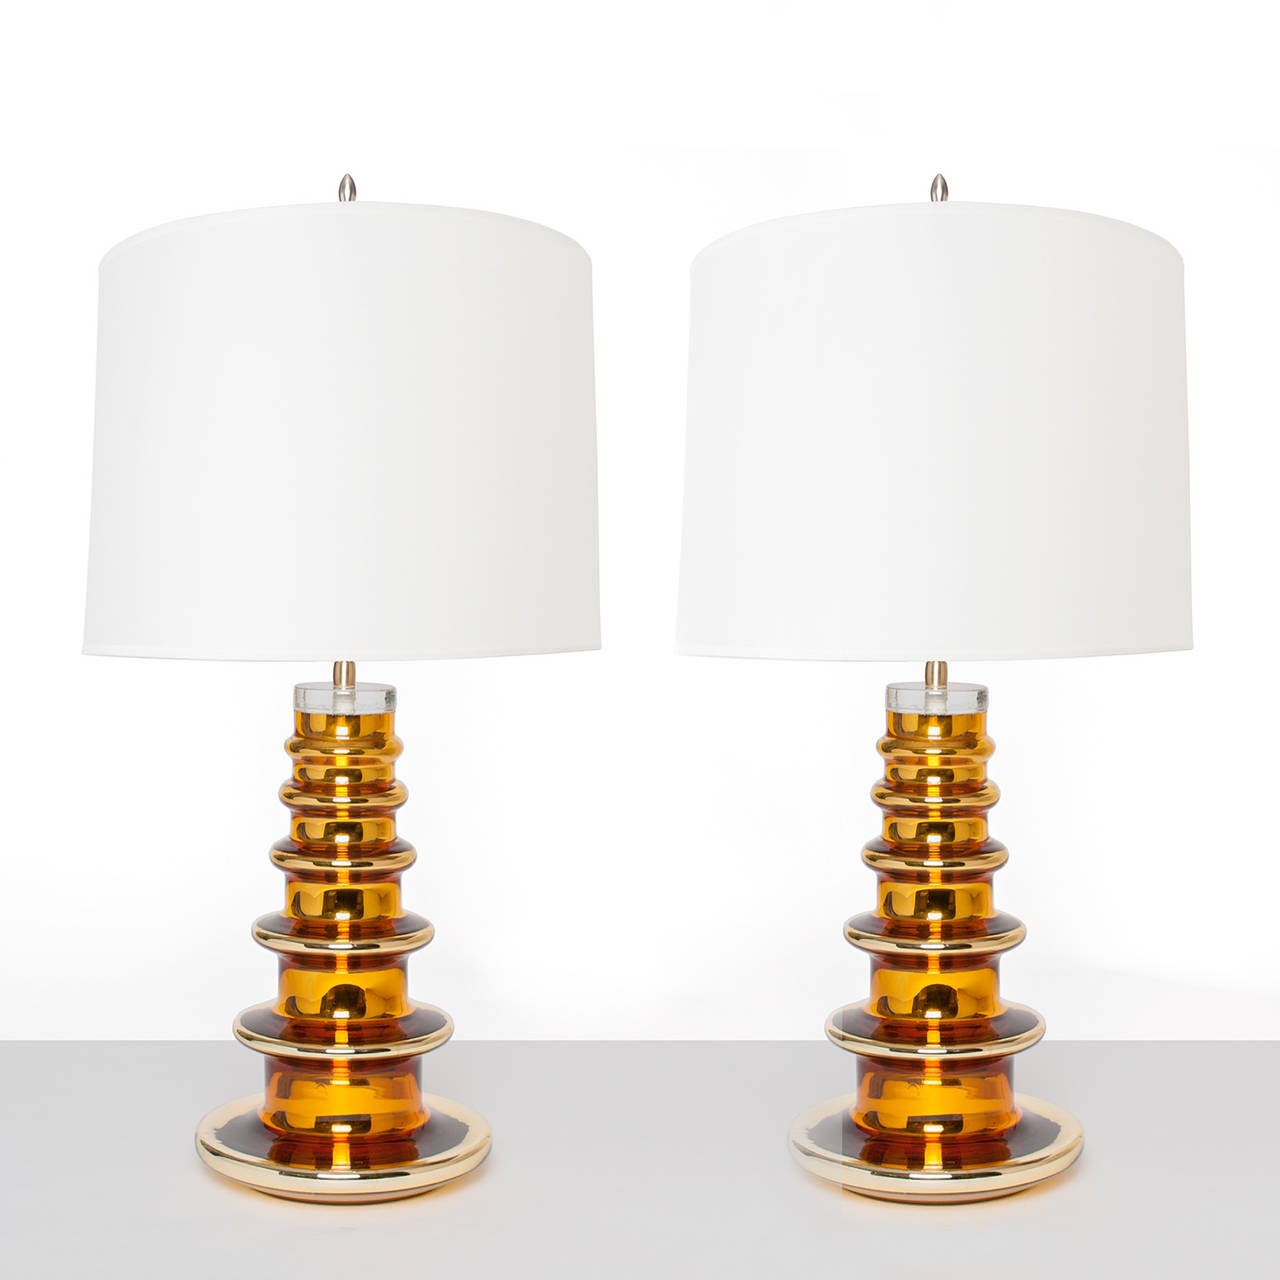 Pair of Swedish mid-century modern gold mercury glass lamps by Gustav Leek, Orrefors circa 1960. Newly electrifed with polished brass hardware double socket clusters. Overall H: 28